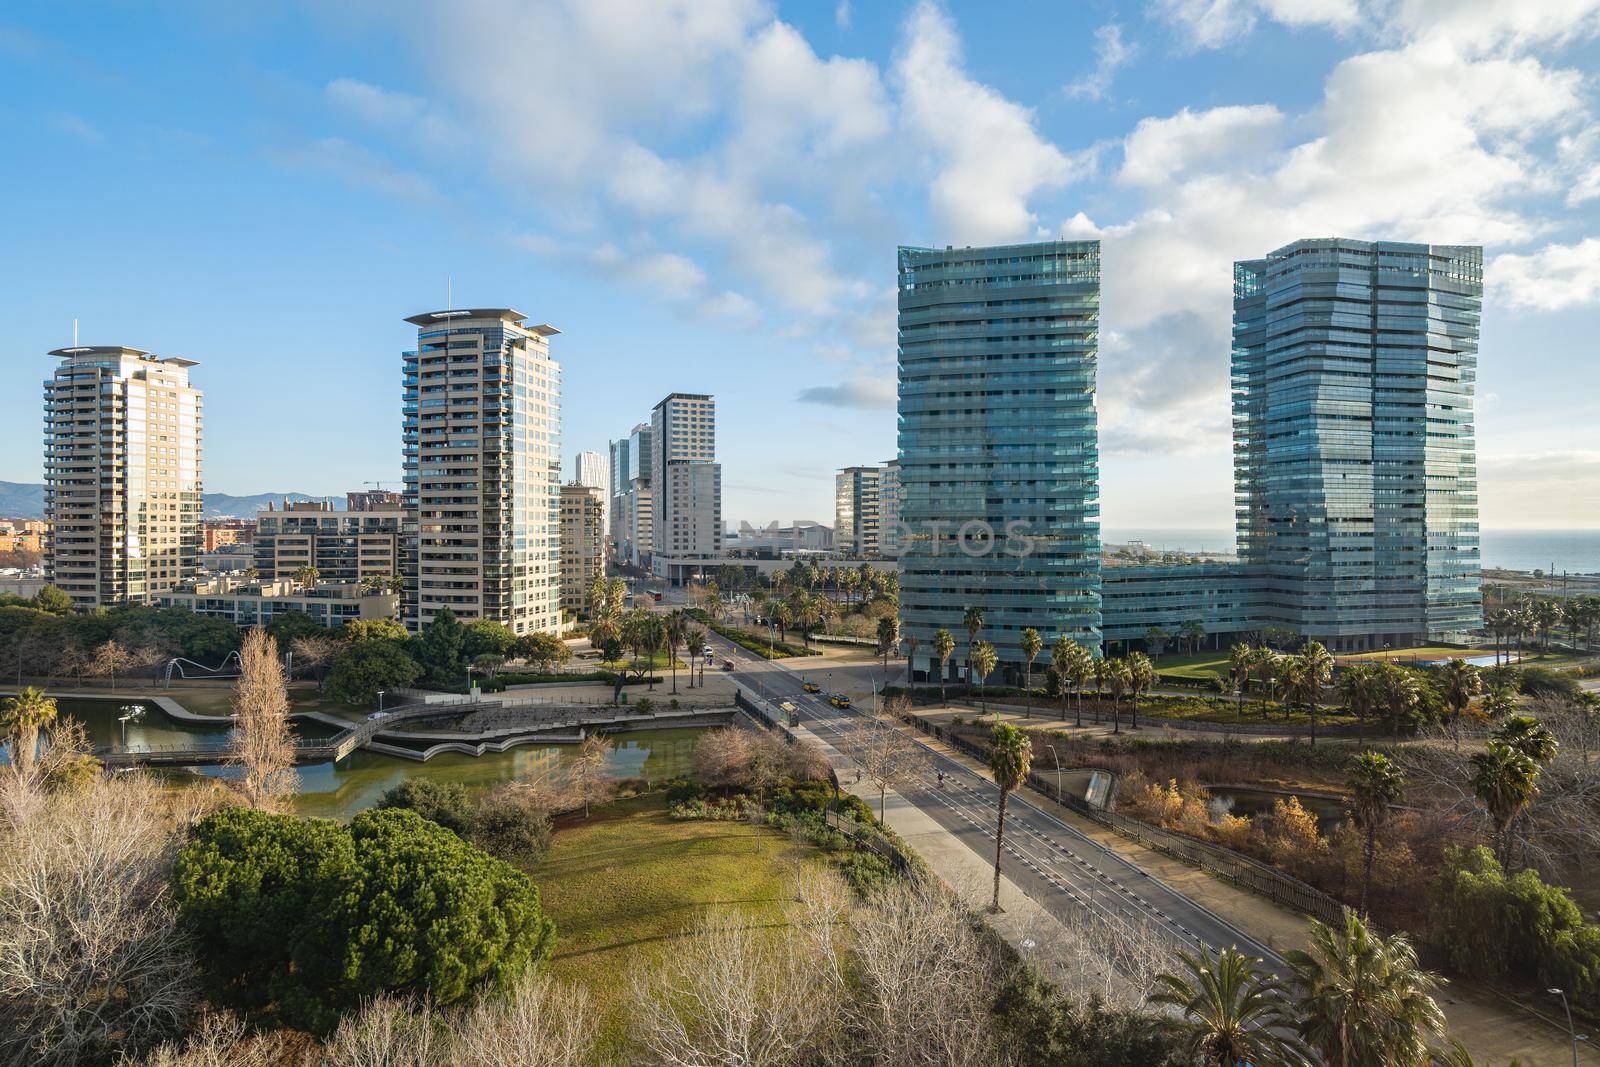 View of expensive area with park and modern high-rise buildings. Diagonal Mar district close to the sea in Barcelona, Spain. Sunny day with clouds.